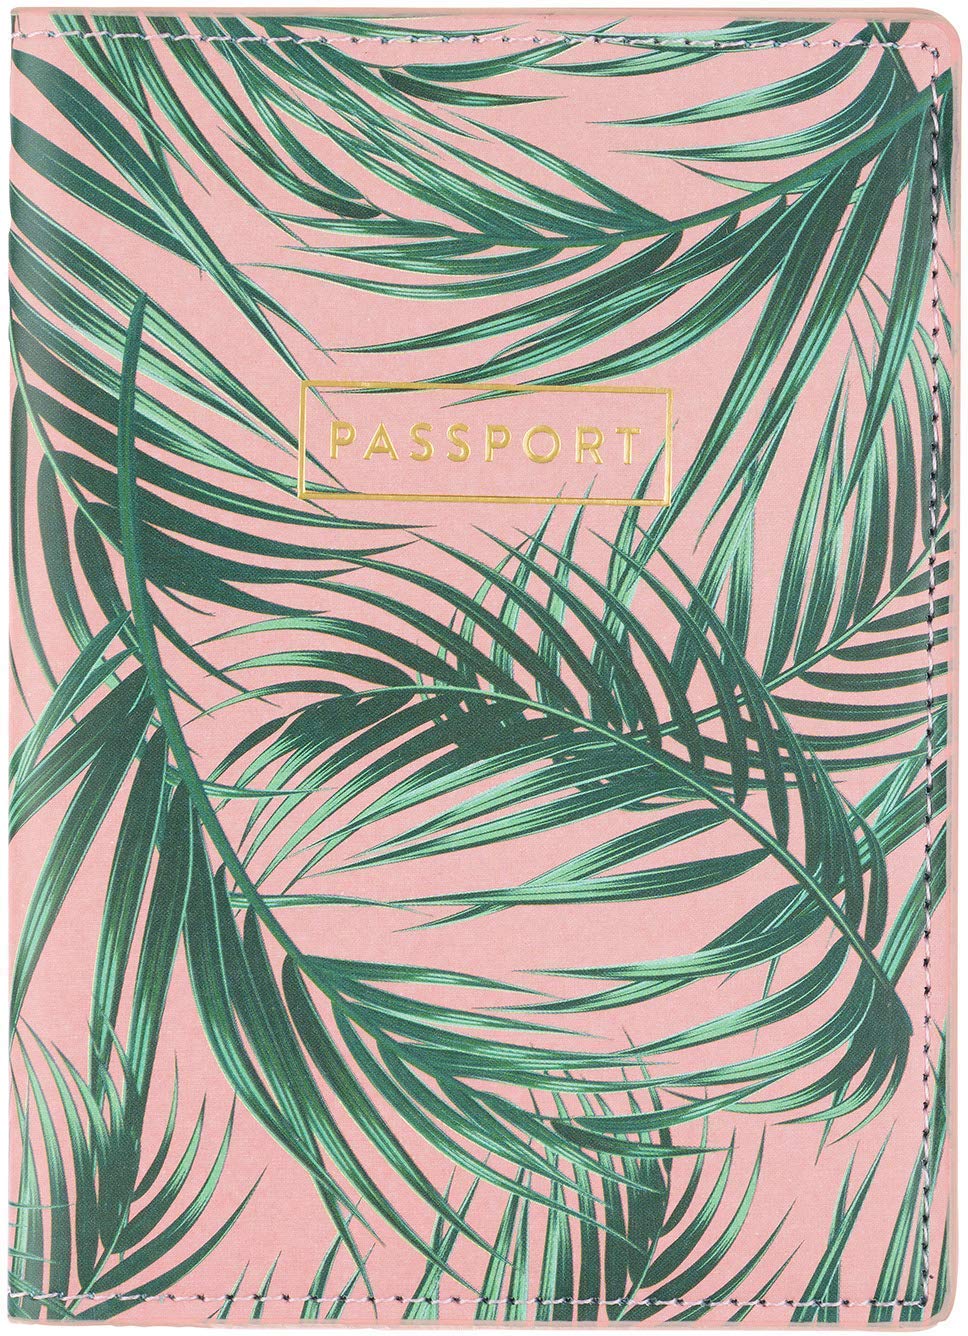 Eccolo Baby Pink Travel Passport Cover Case with Palm Fronds Design and Document Holder Storage Pocket